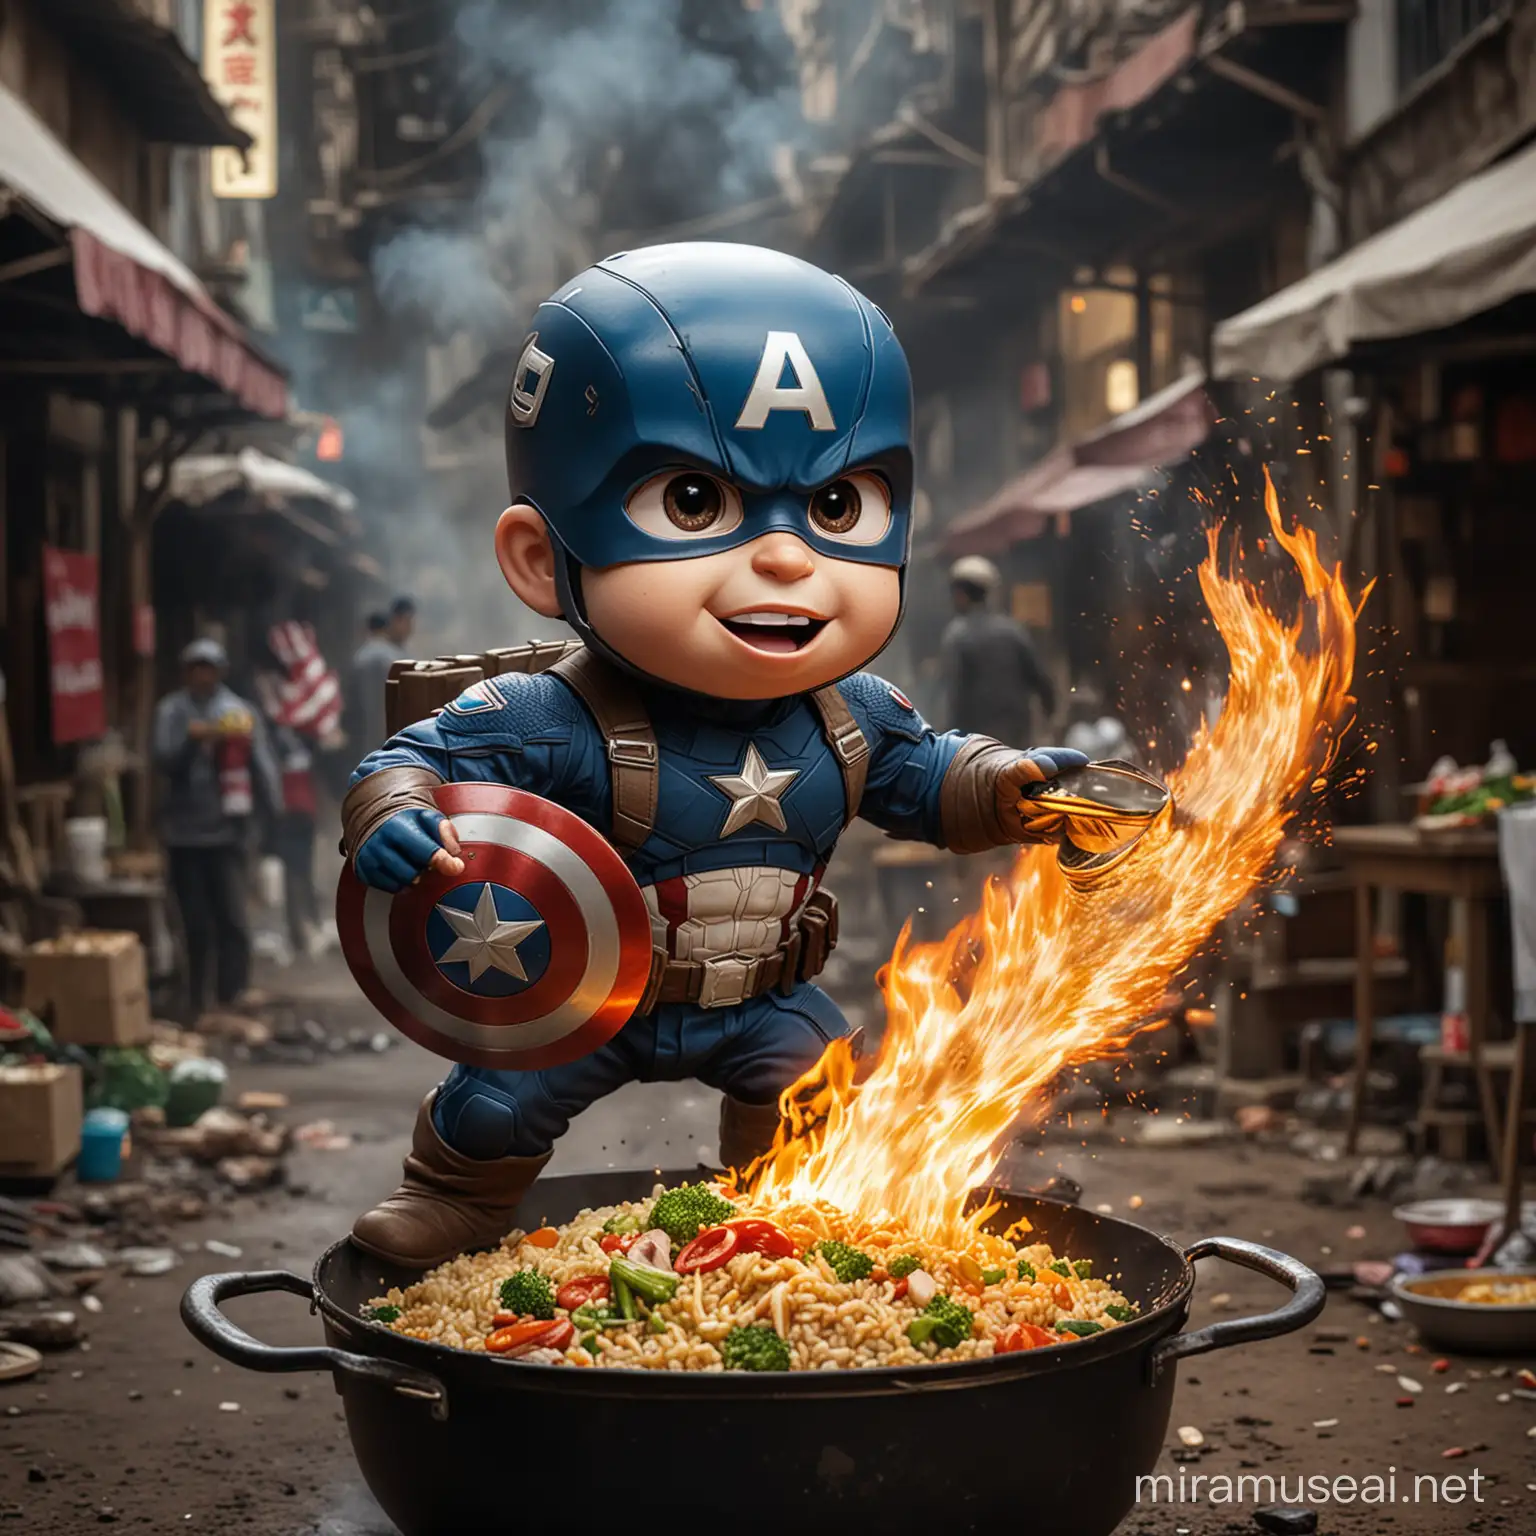 Provide an image of Captain America baby form caricature memes cooking fried rice using captain america's shield as a substitute for a wok. The fried rice is depicted flying off the Captain America's shield as a substitute for a wok, with flames blazing underneath it. Captain America is shown cooking at an interesting perspective angle, with his cart and the Jakarta market in the background. He is smiling and laughing while cooking. Ensure a dramatic effect against a high-contrast black background for printing in DTF (Direct-to-Film) Printing or water-based color printing. The image and background should be centered and uncropped.